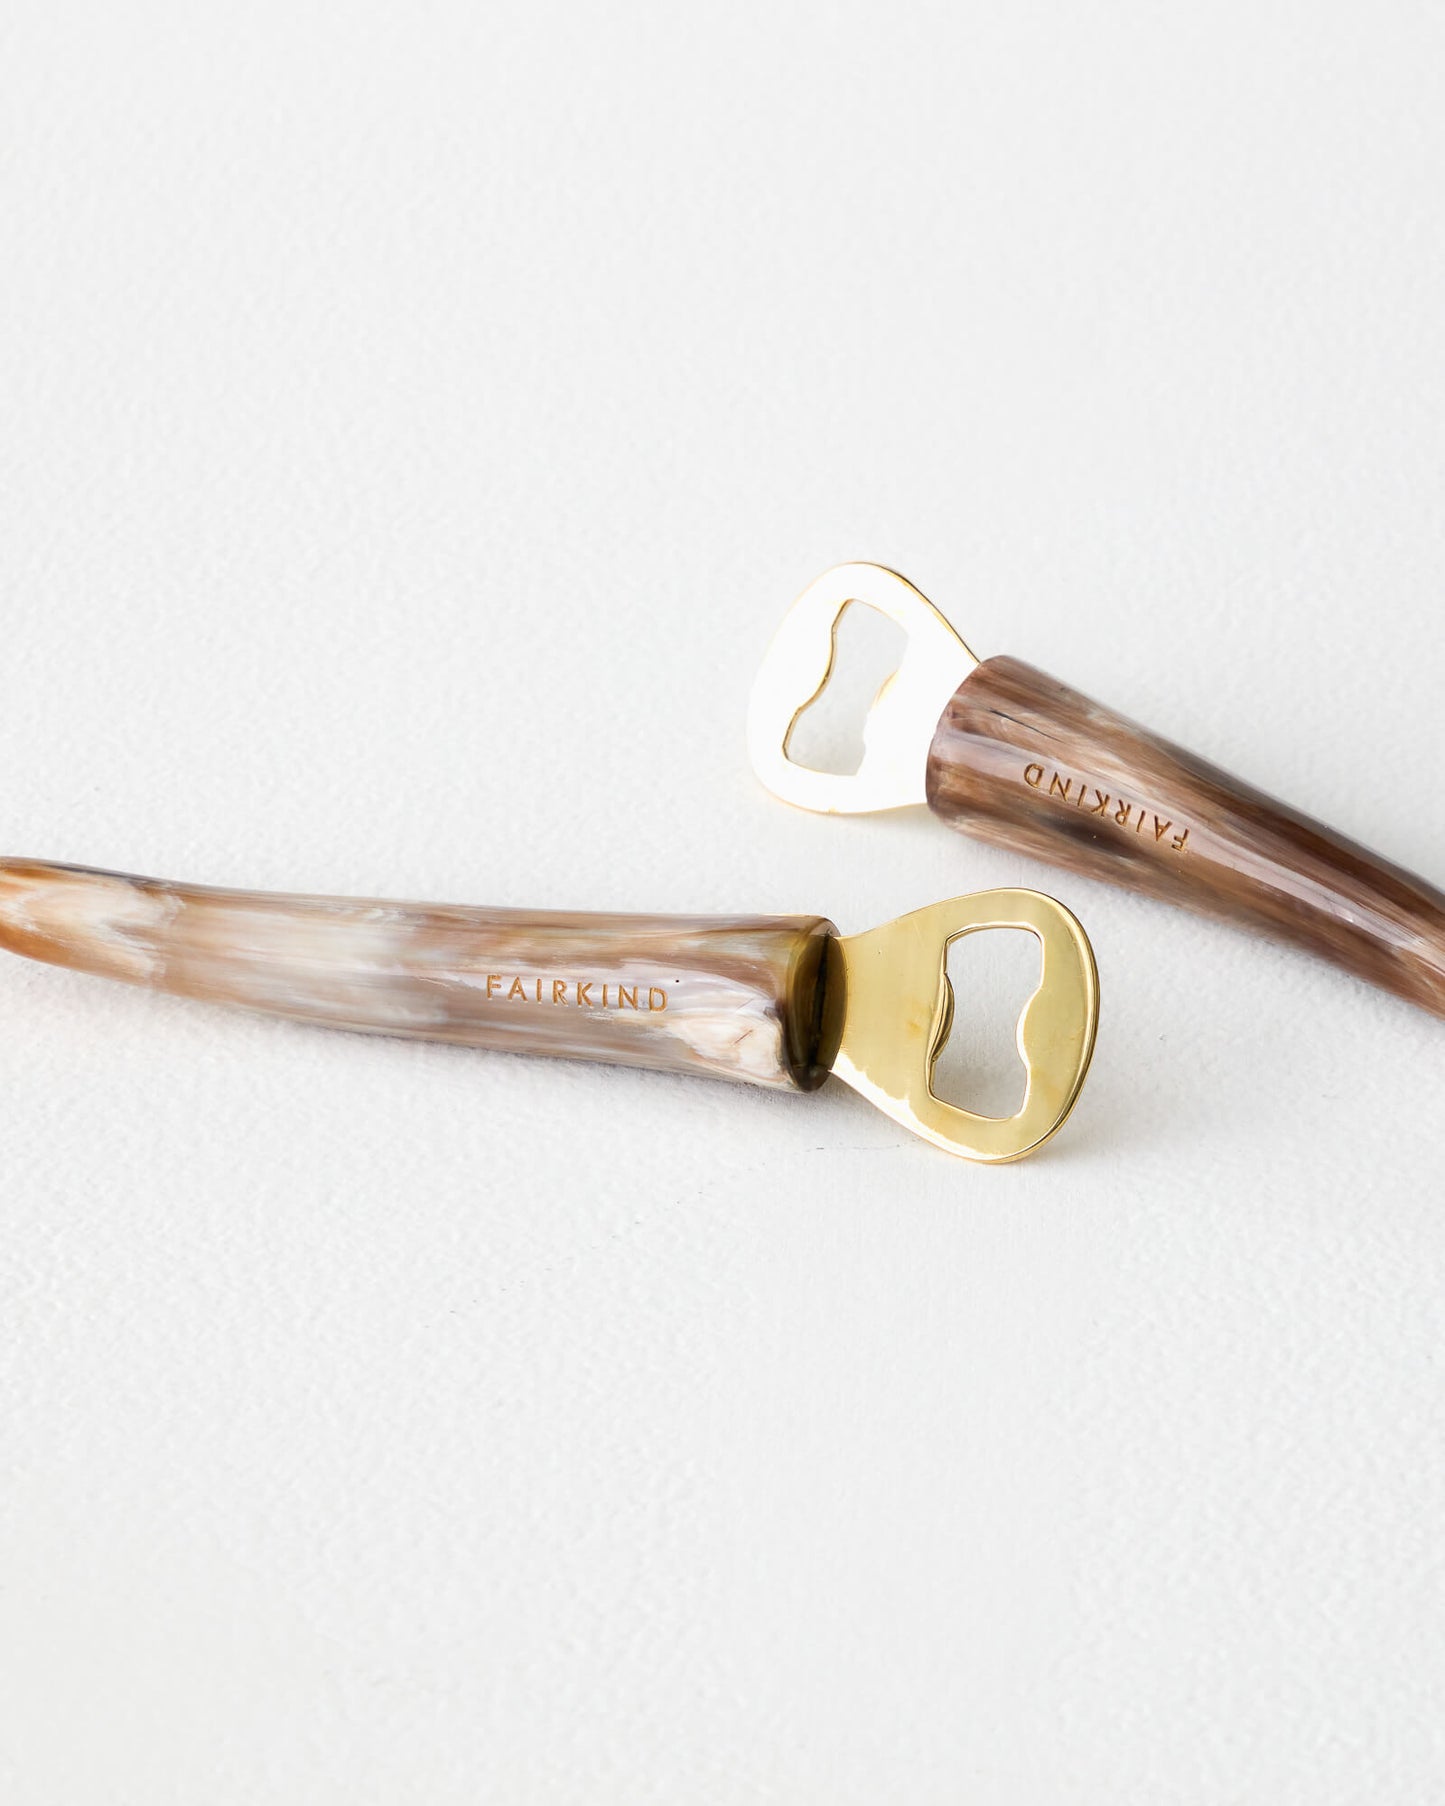 Fairkind Ankole horn bottle opener, collection of ethically sourced and handmade barware.